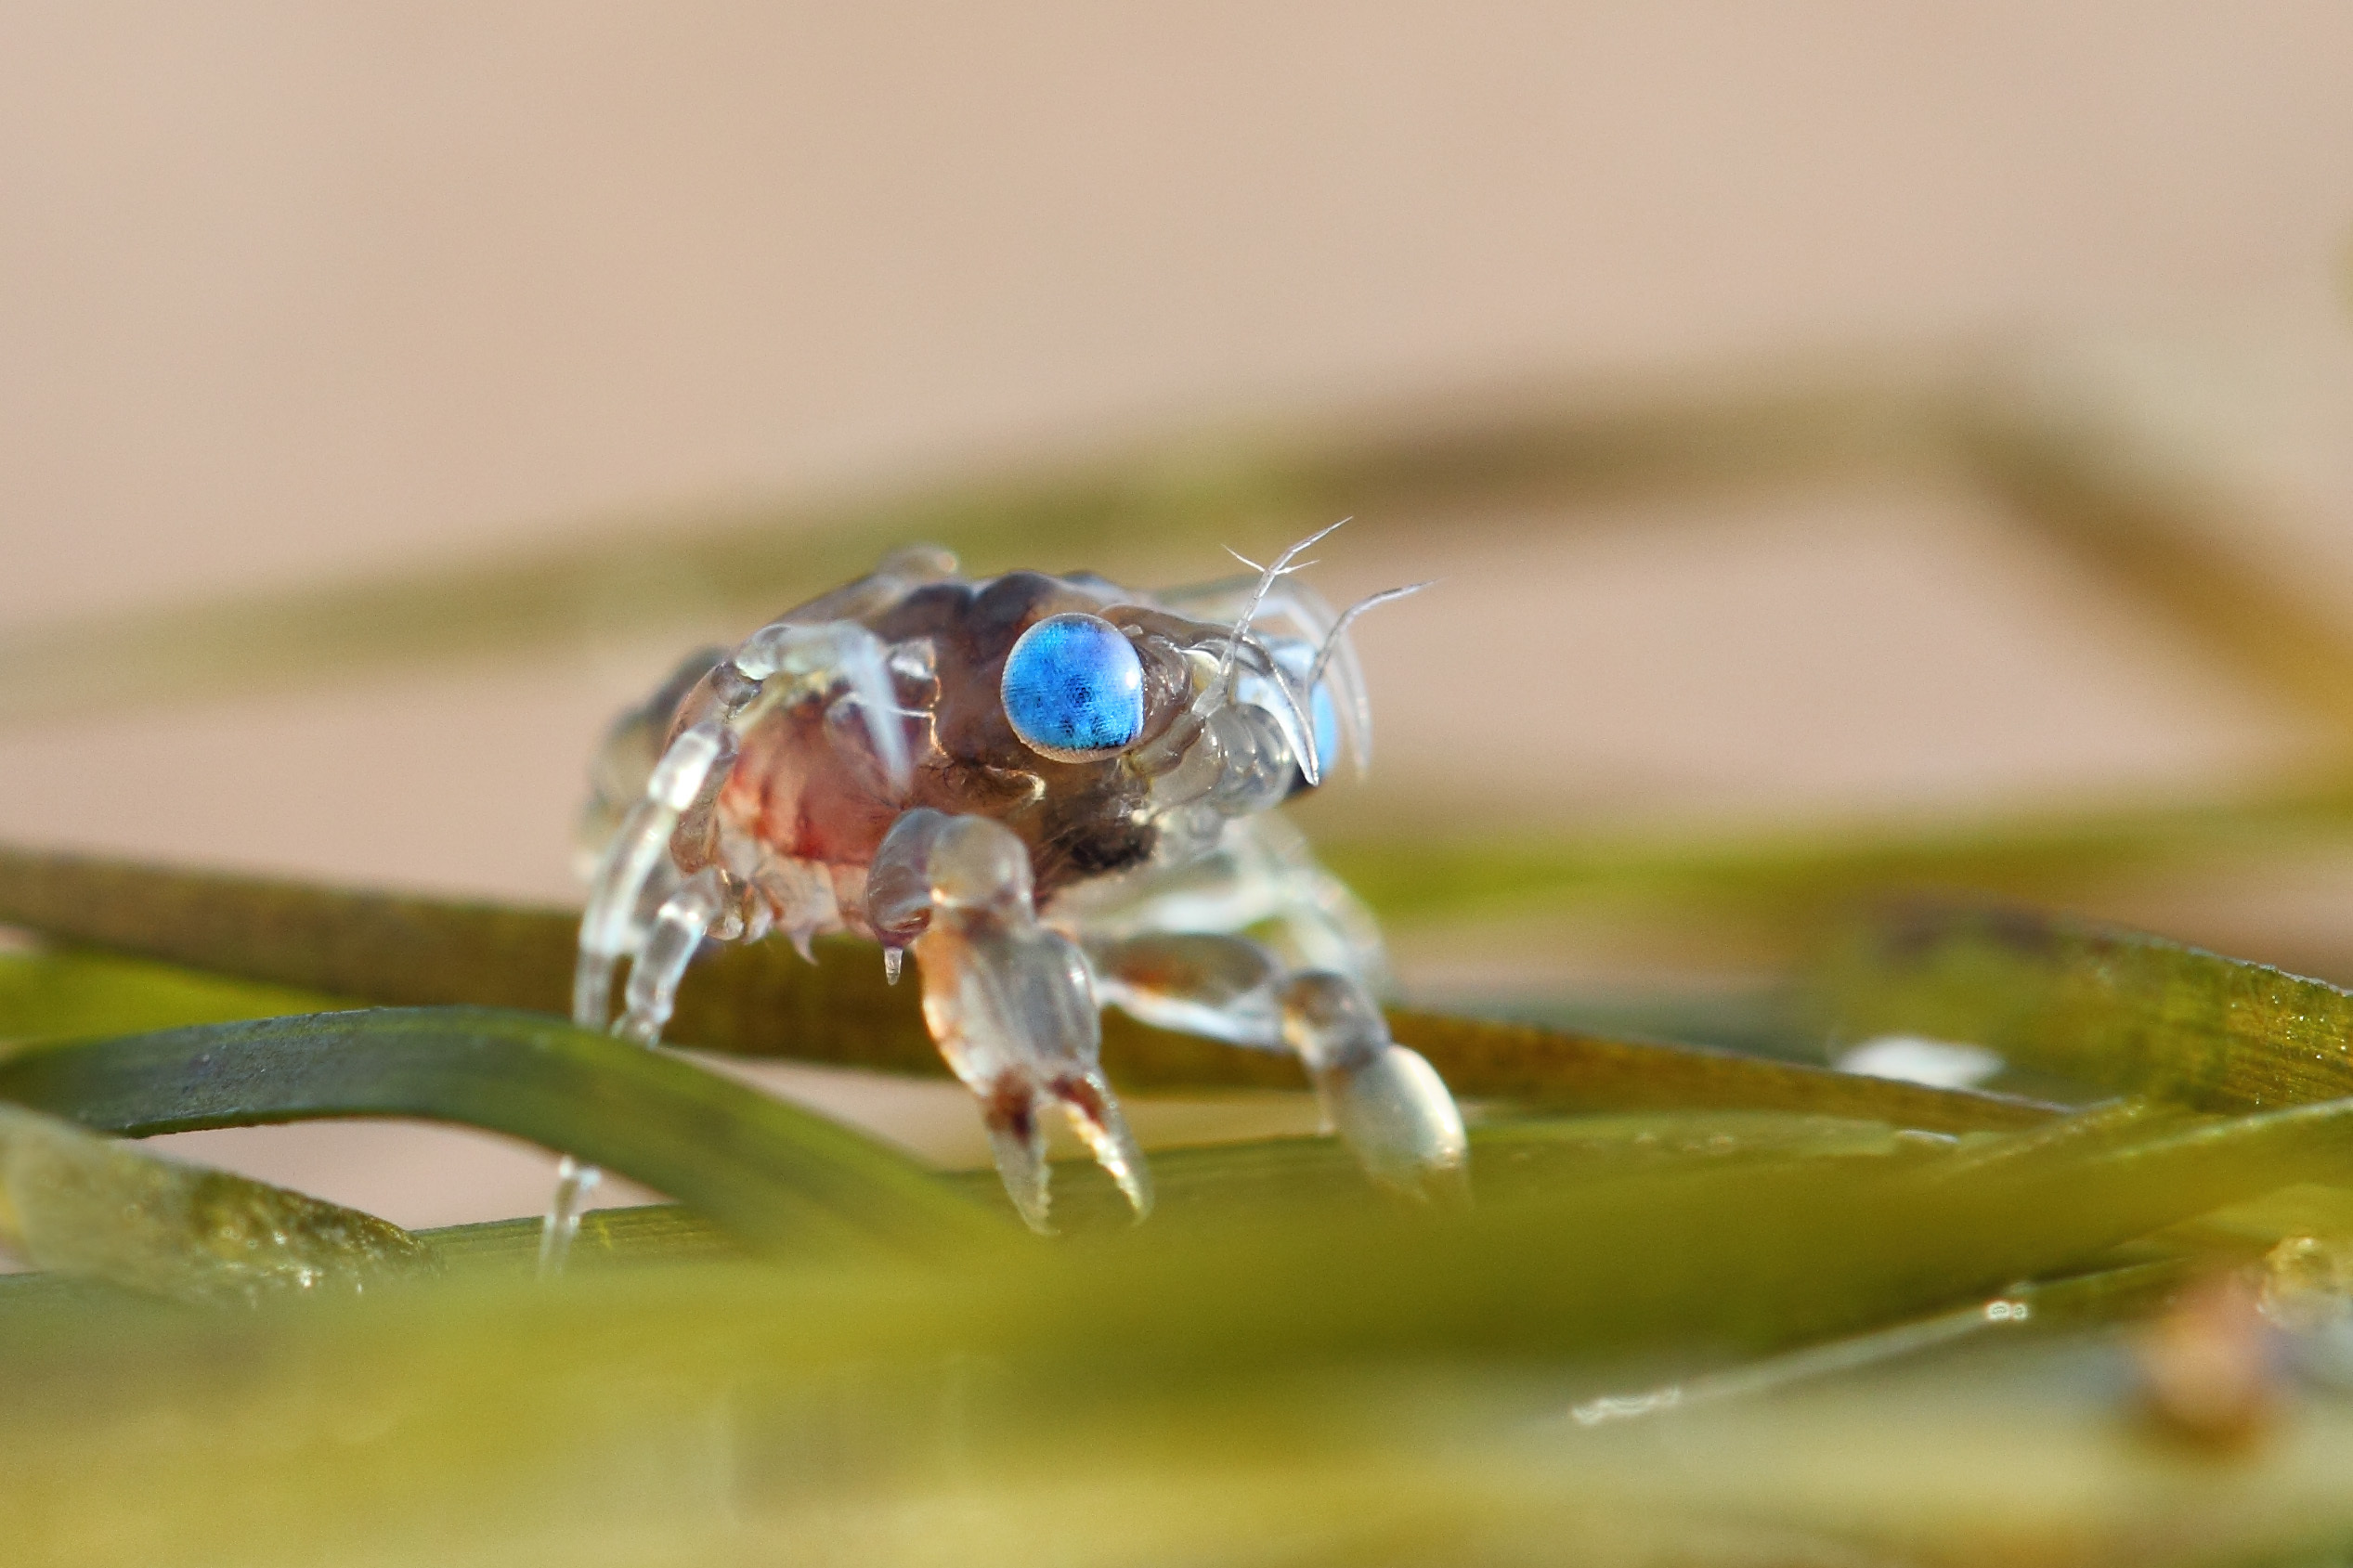 A stunning, tiny larval crab found on St Cyrus National Nature Reserve by official photographer Pauline Smith.